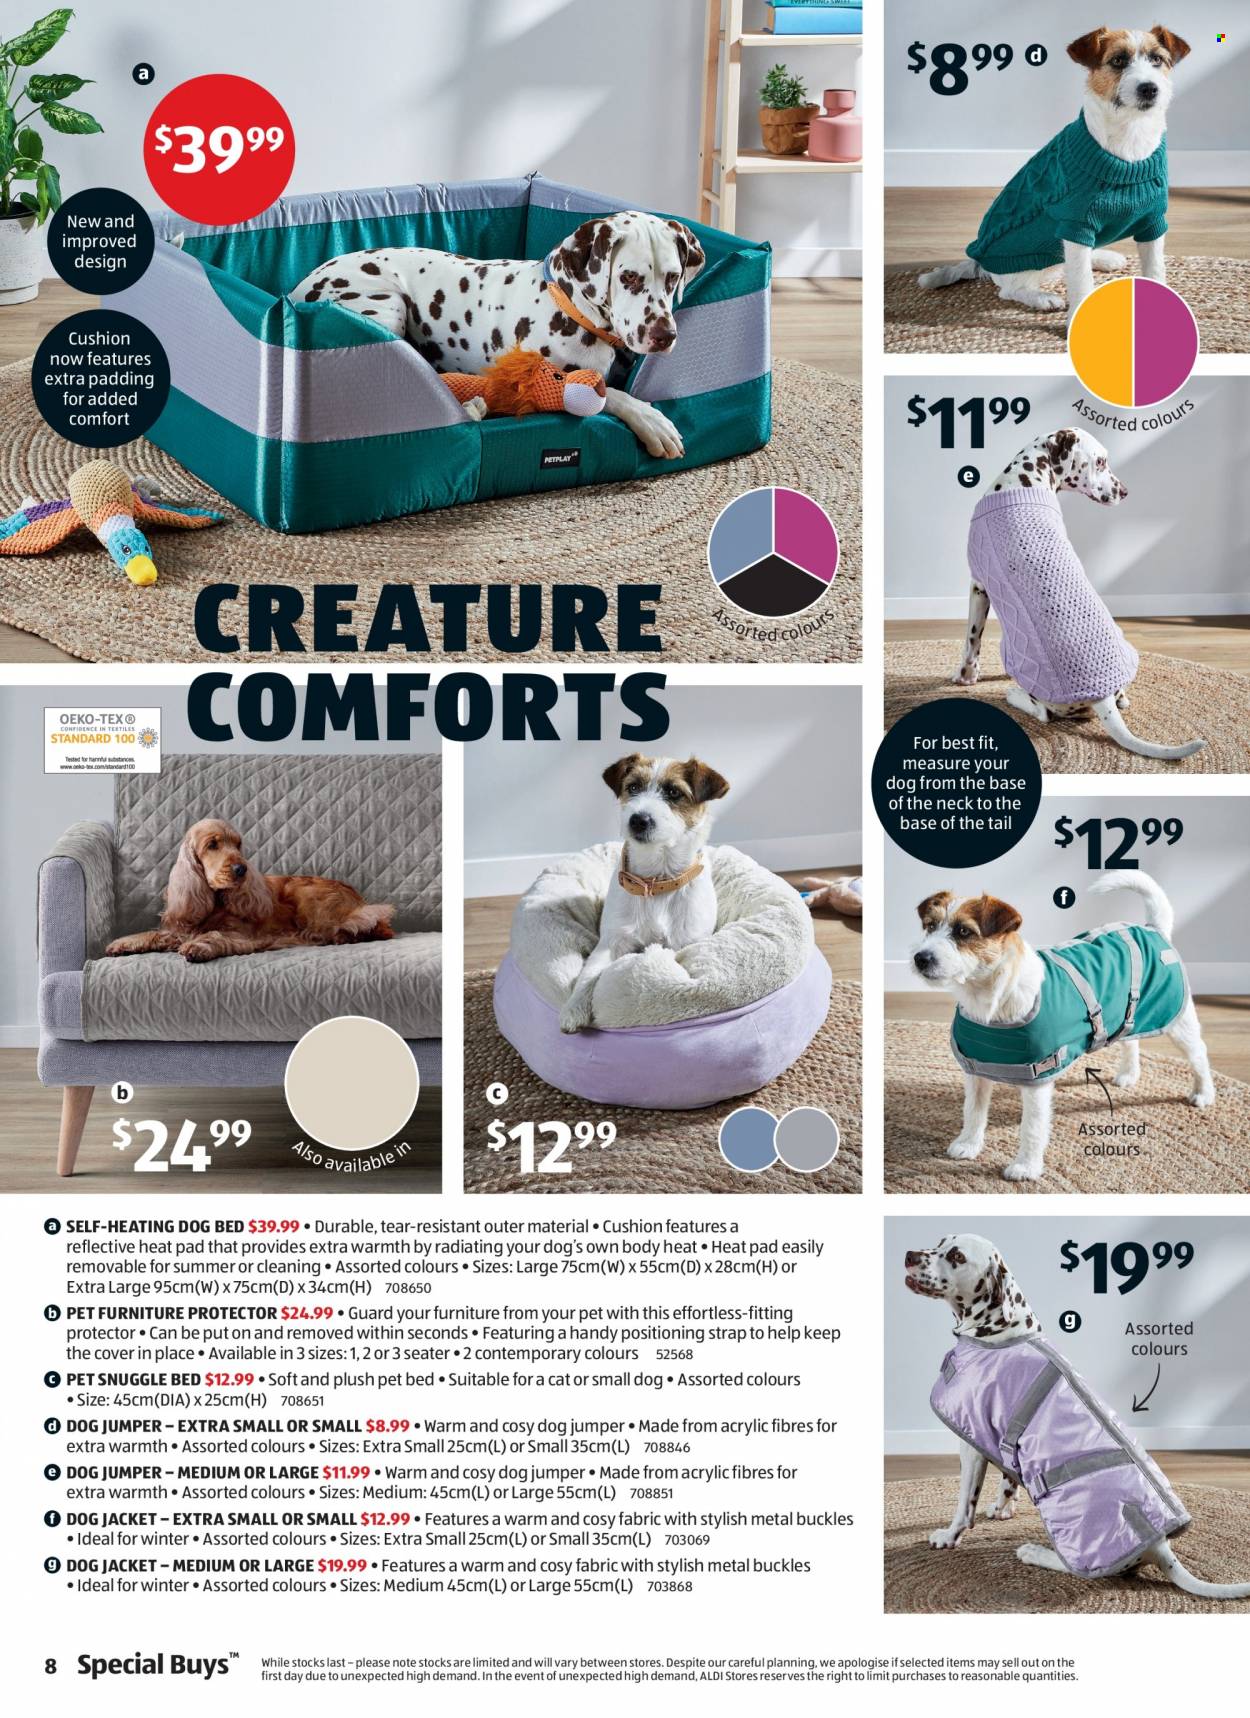 ALDI Catalogue - 12 May 2022 - 18 May 2022 - Sales products - Snuggle, cushion, dog bed, pet bed, jacket, sweater, strap. Page 8.